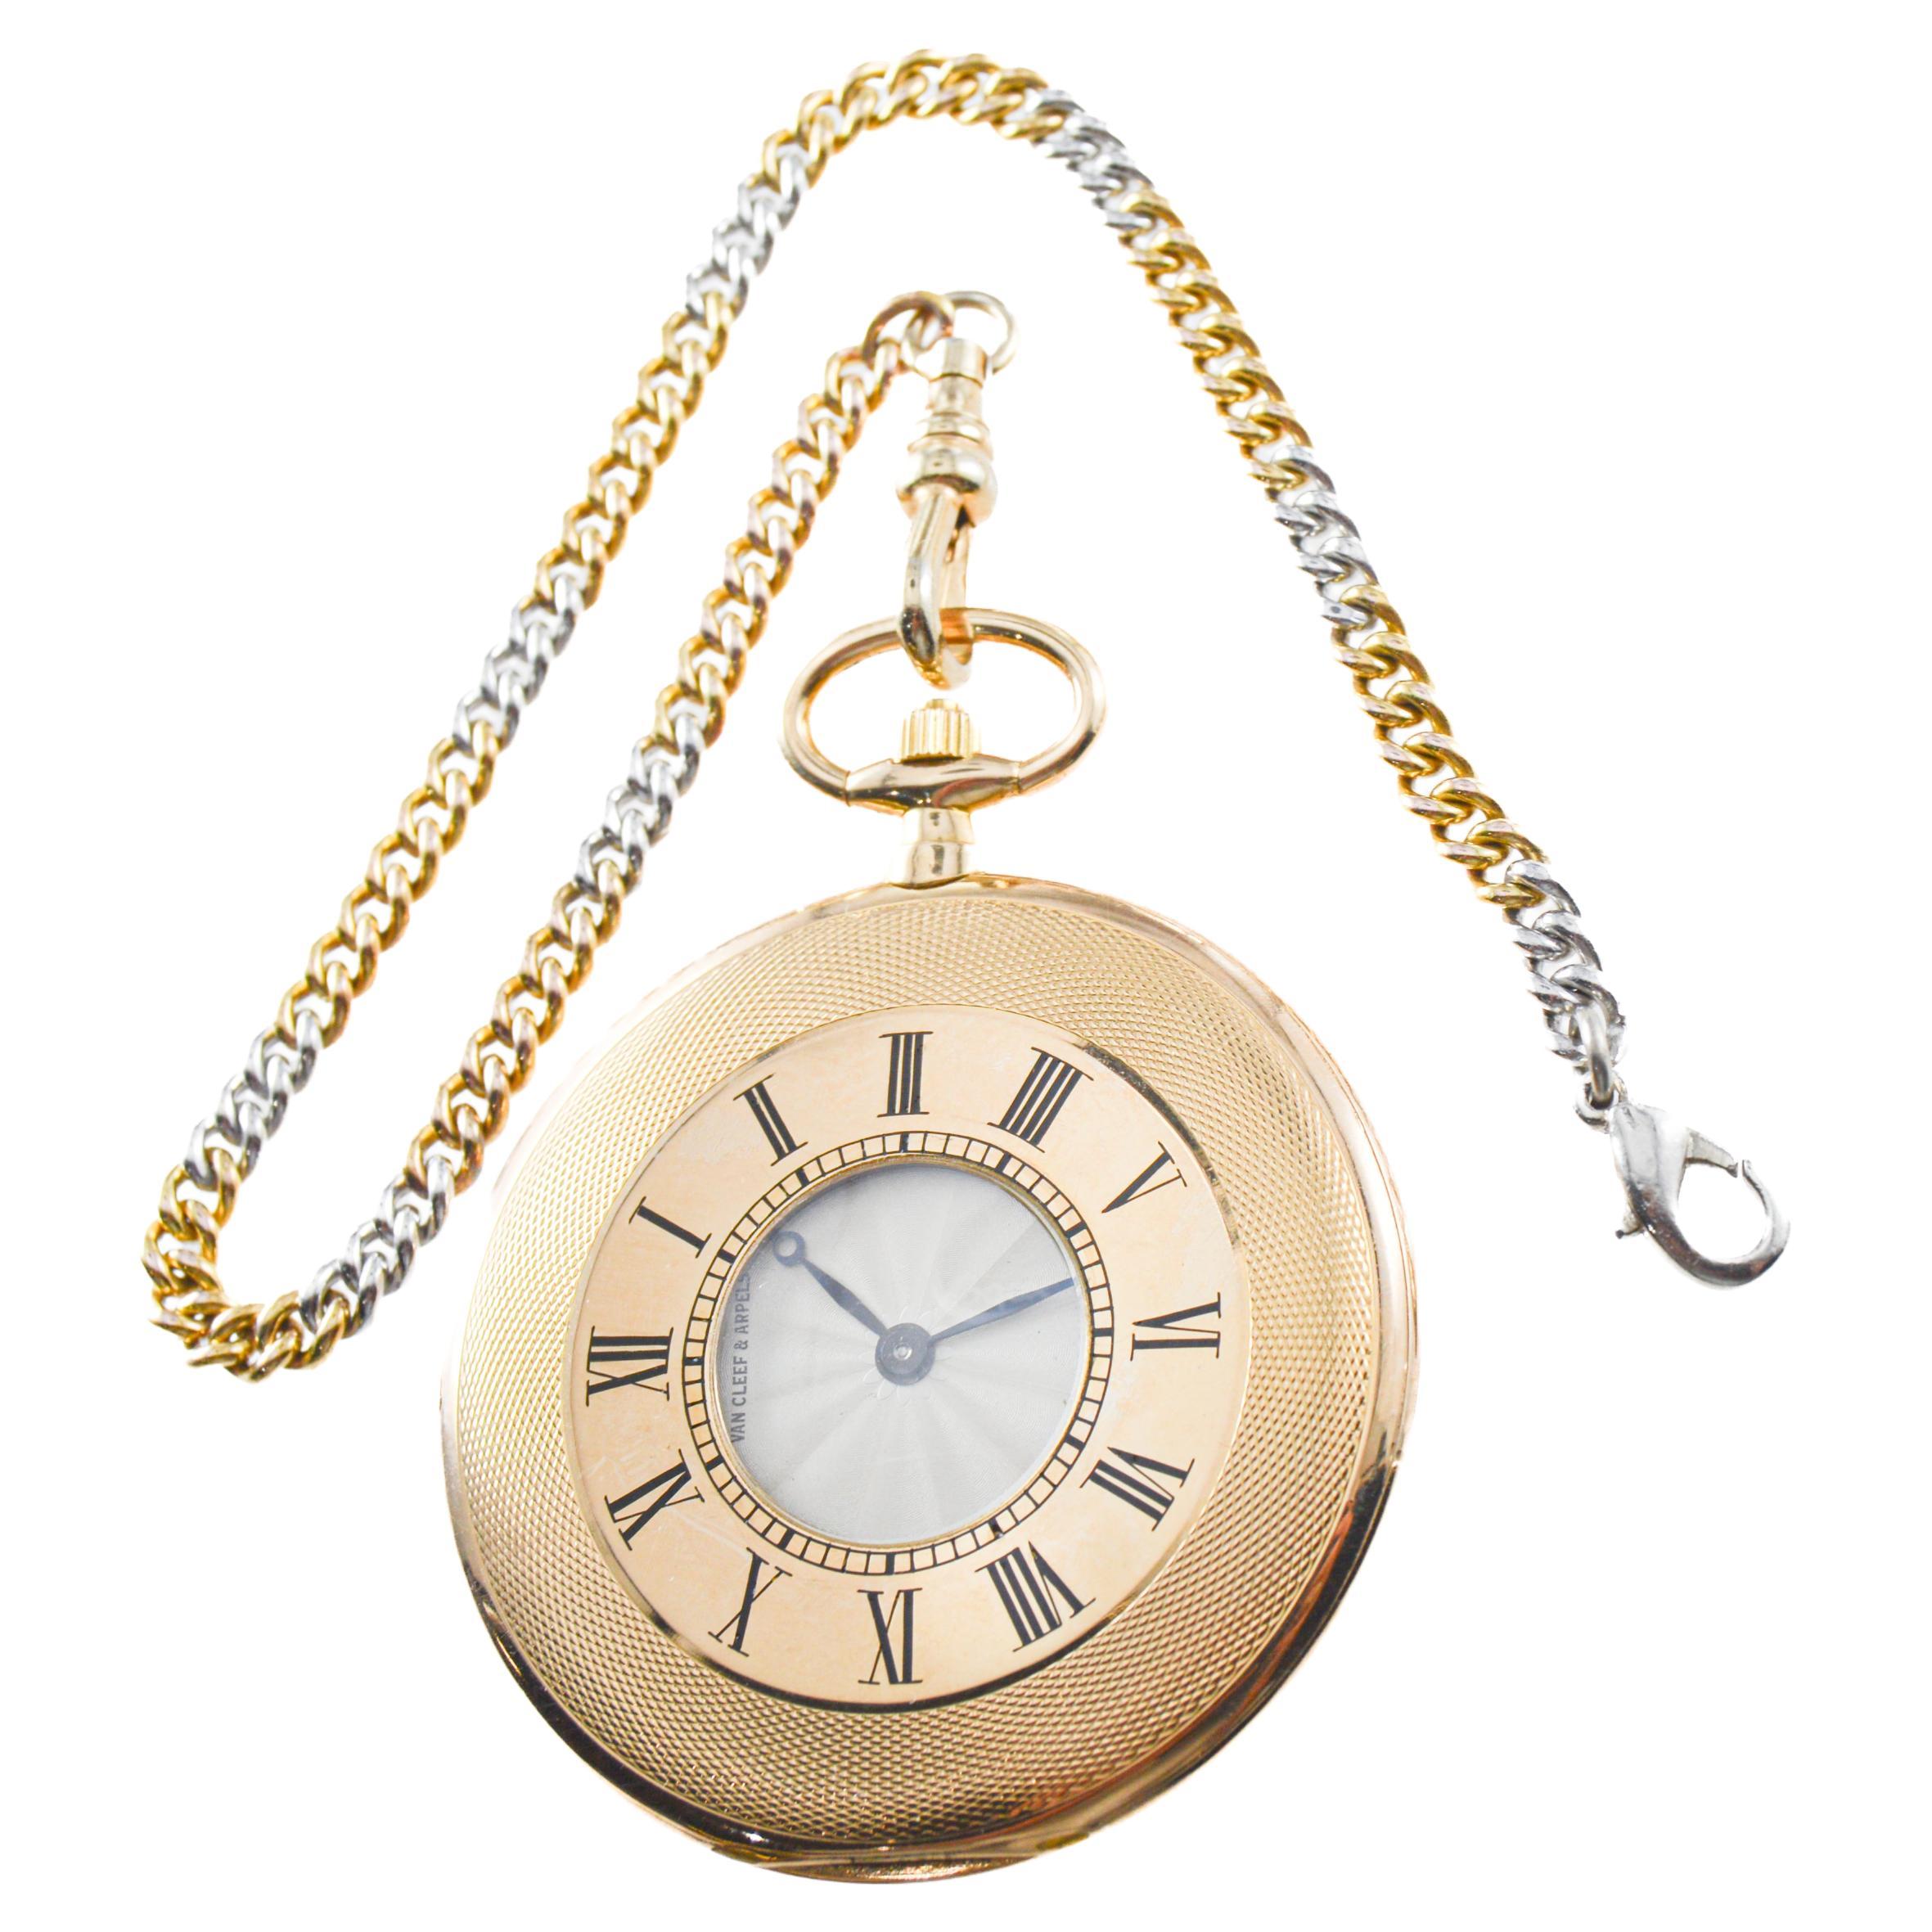 Van Cleef & Arpels 18Kt. Art Deco Ultra Thin Pocket Watch, circa 1930's In Excellent Condition For Sale In Long Beach, CA